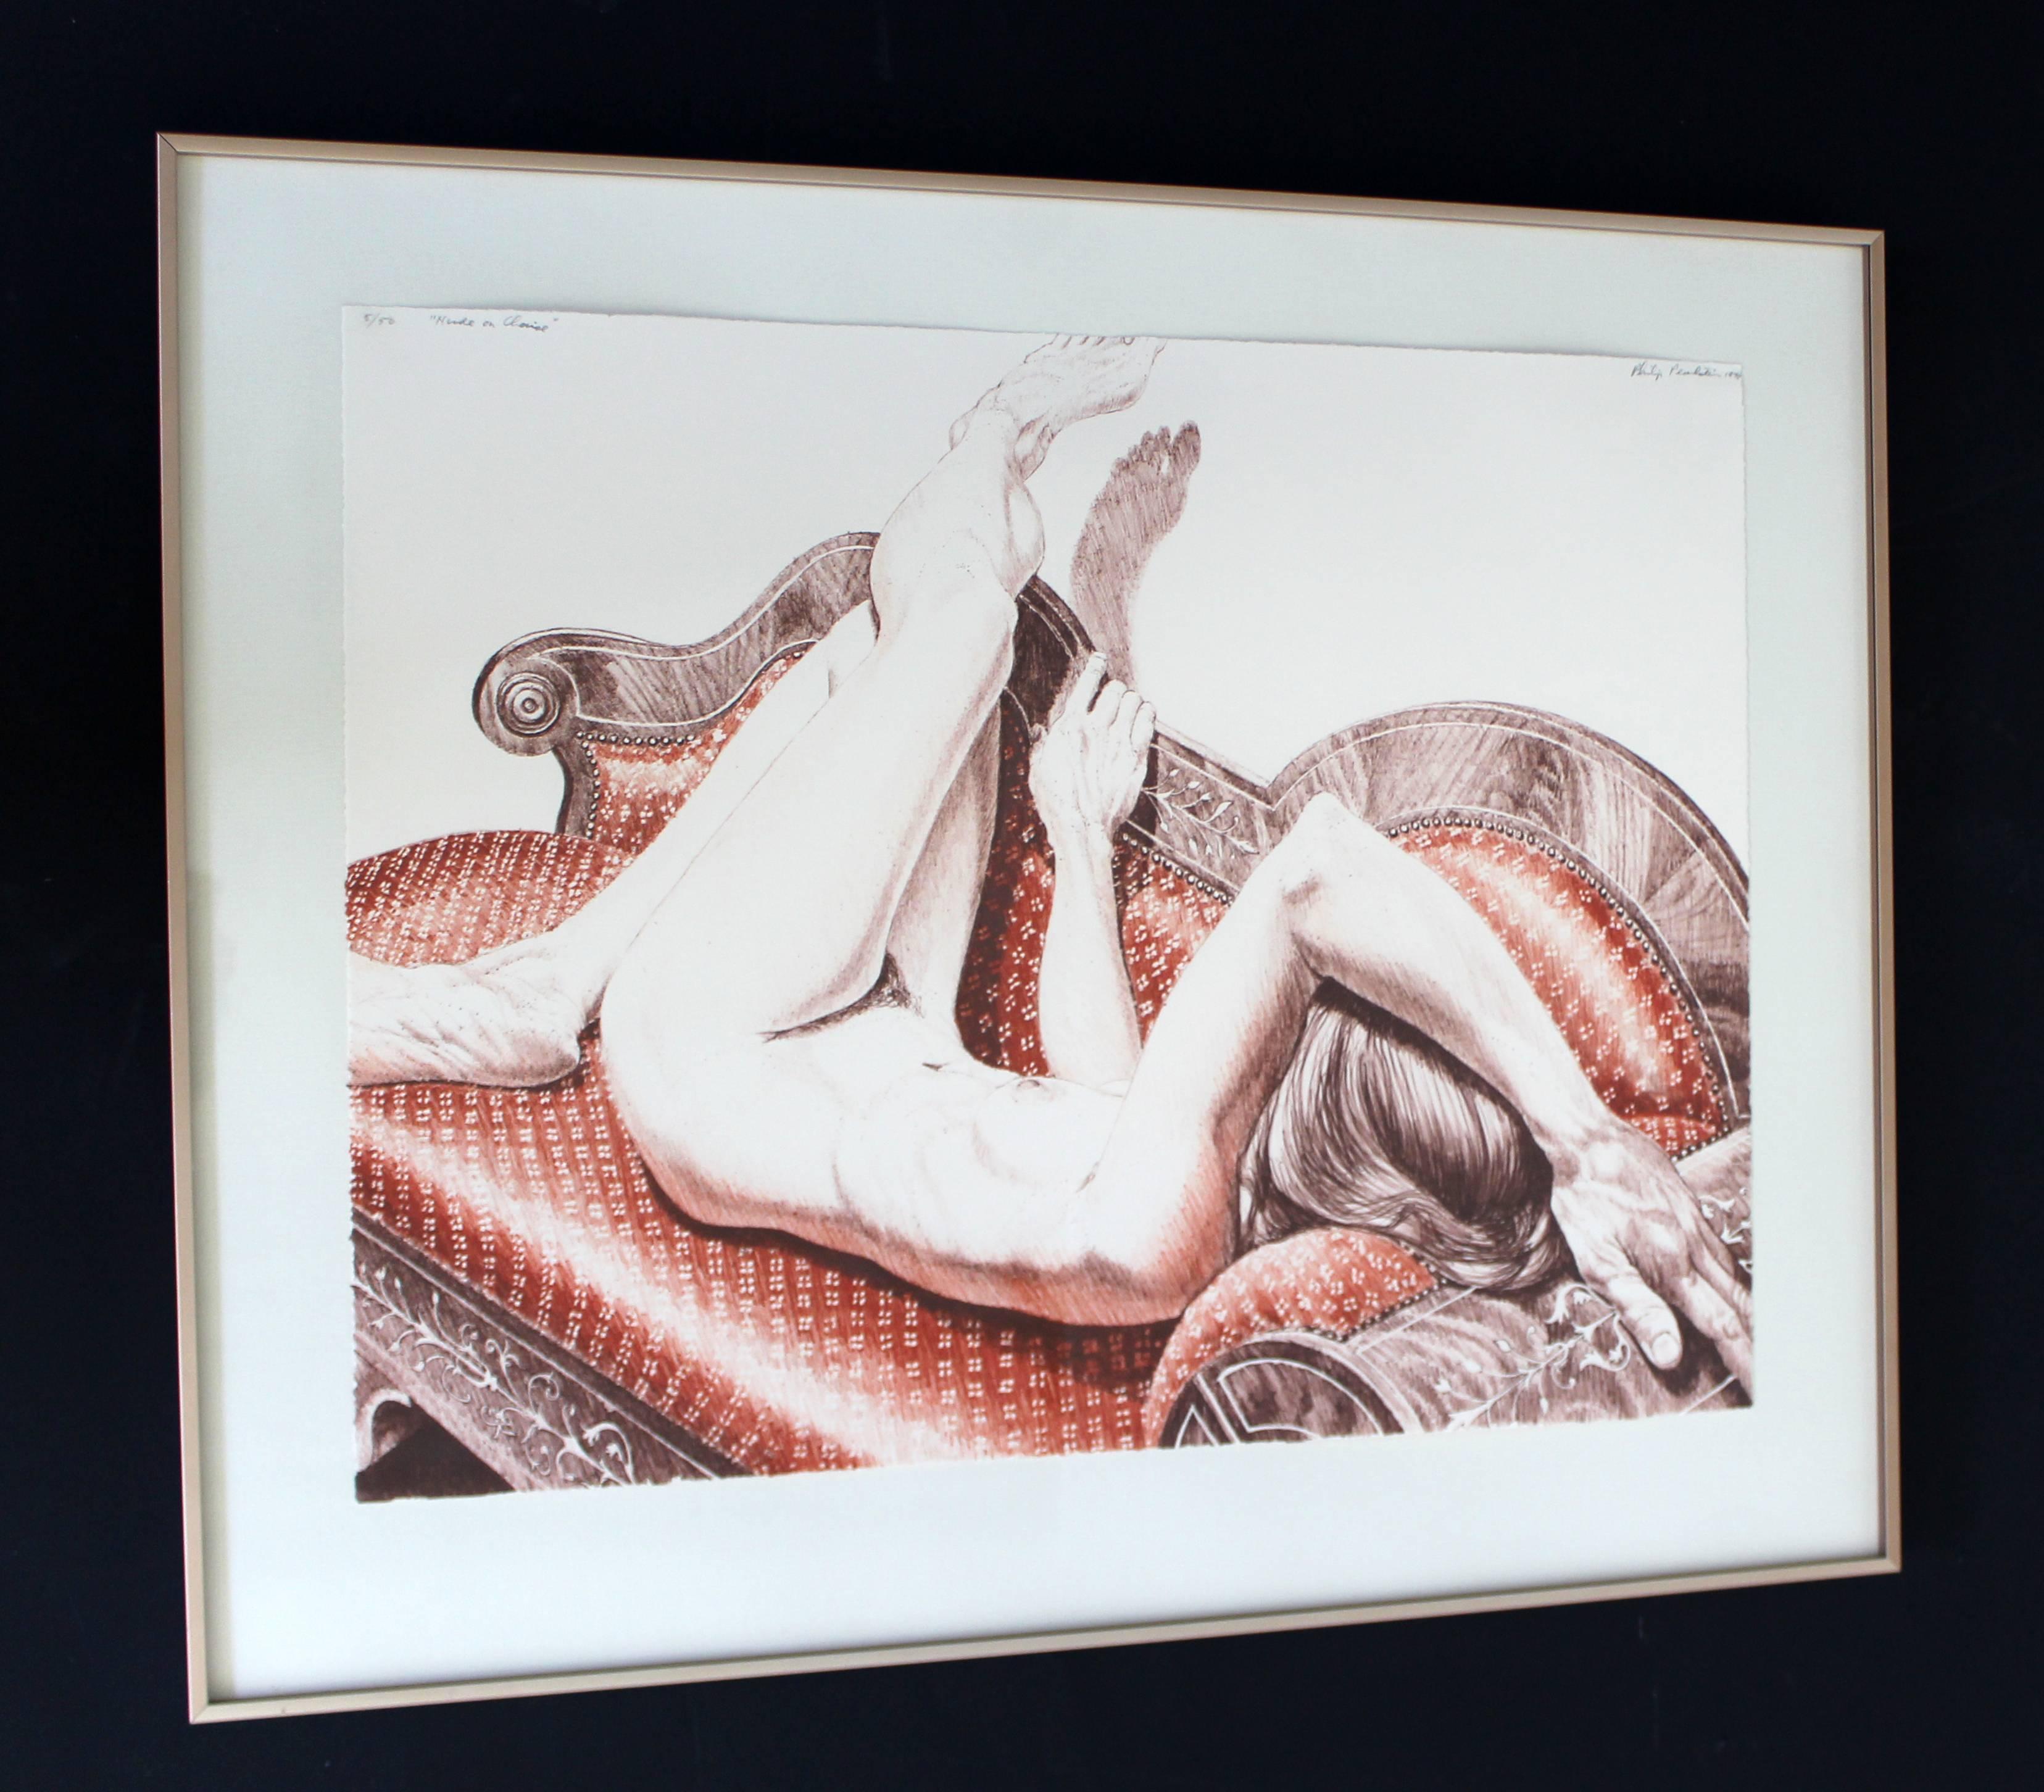 For your consideration is an incredibly detailed, drawing lithograph, entitled "Nude on Chaise," signed and dated by Philip Pearlstein, circa the 1970s numbered 5/50. In excellent condition. The dimensions of the frame are 27" W x